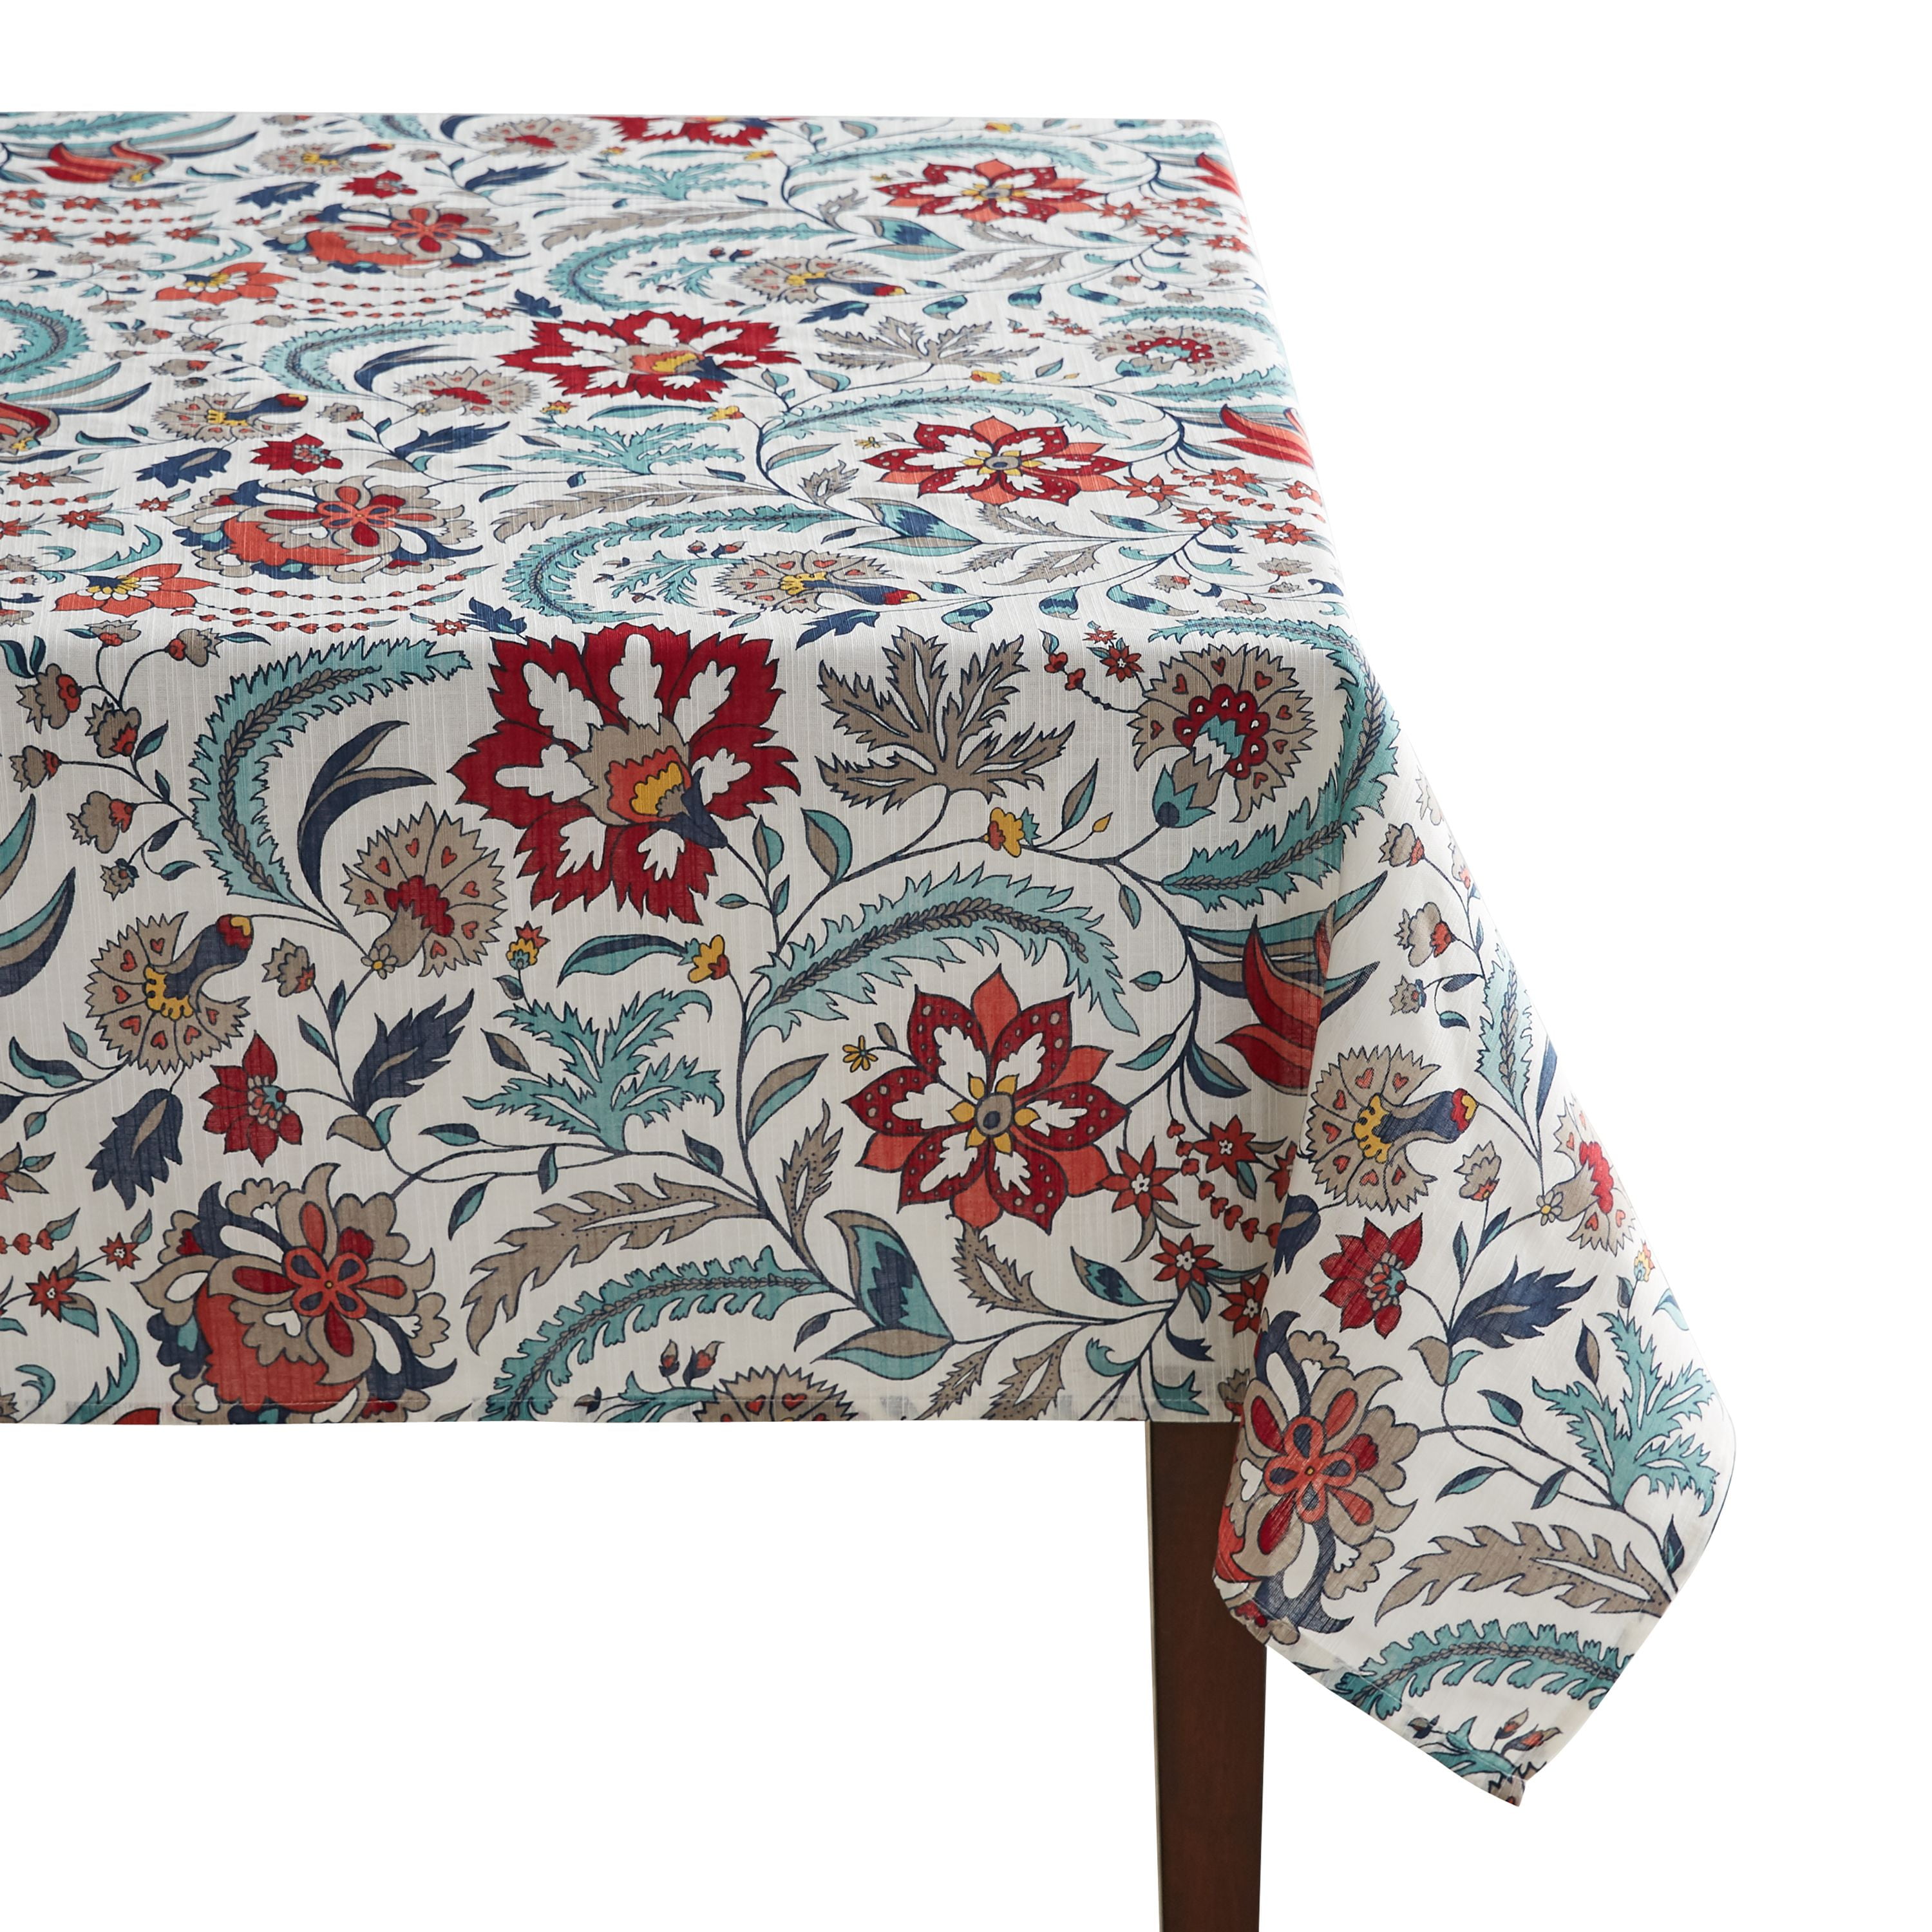 INTERESTPRINT Sunflowers with Pomegranate Rectangle Tablecloth 60 x 84 Inch